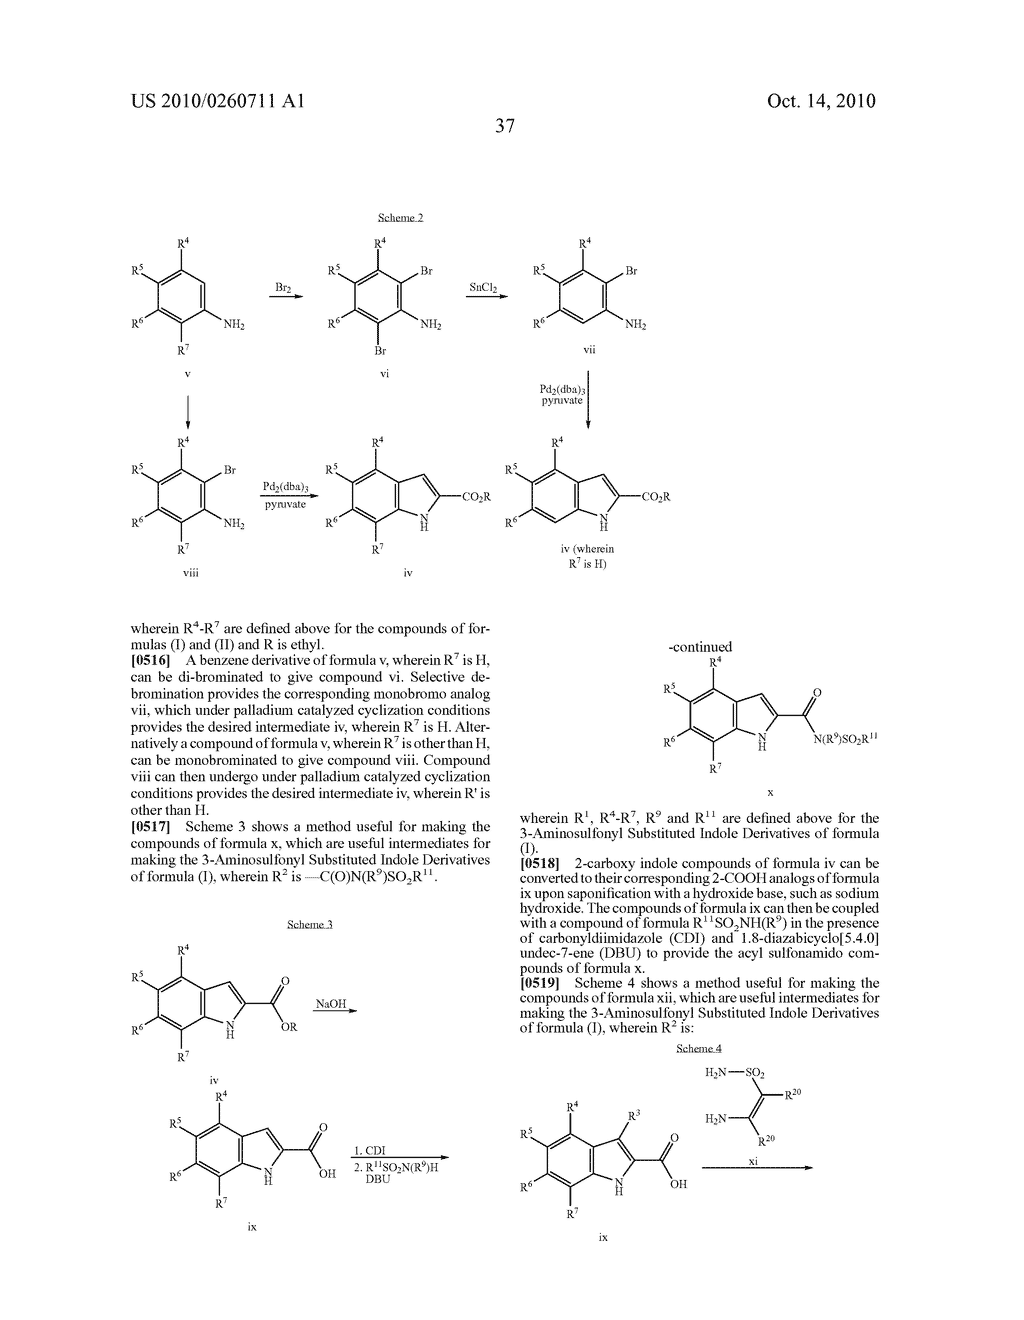 3-AMINOSULFONYL SUBSTITUTED INDOLE DERIVATIVES AND METHODS OF USE THEREOF - diagram, schematic, and image 38